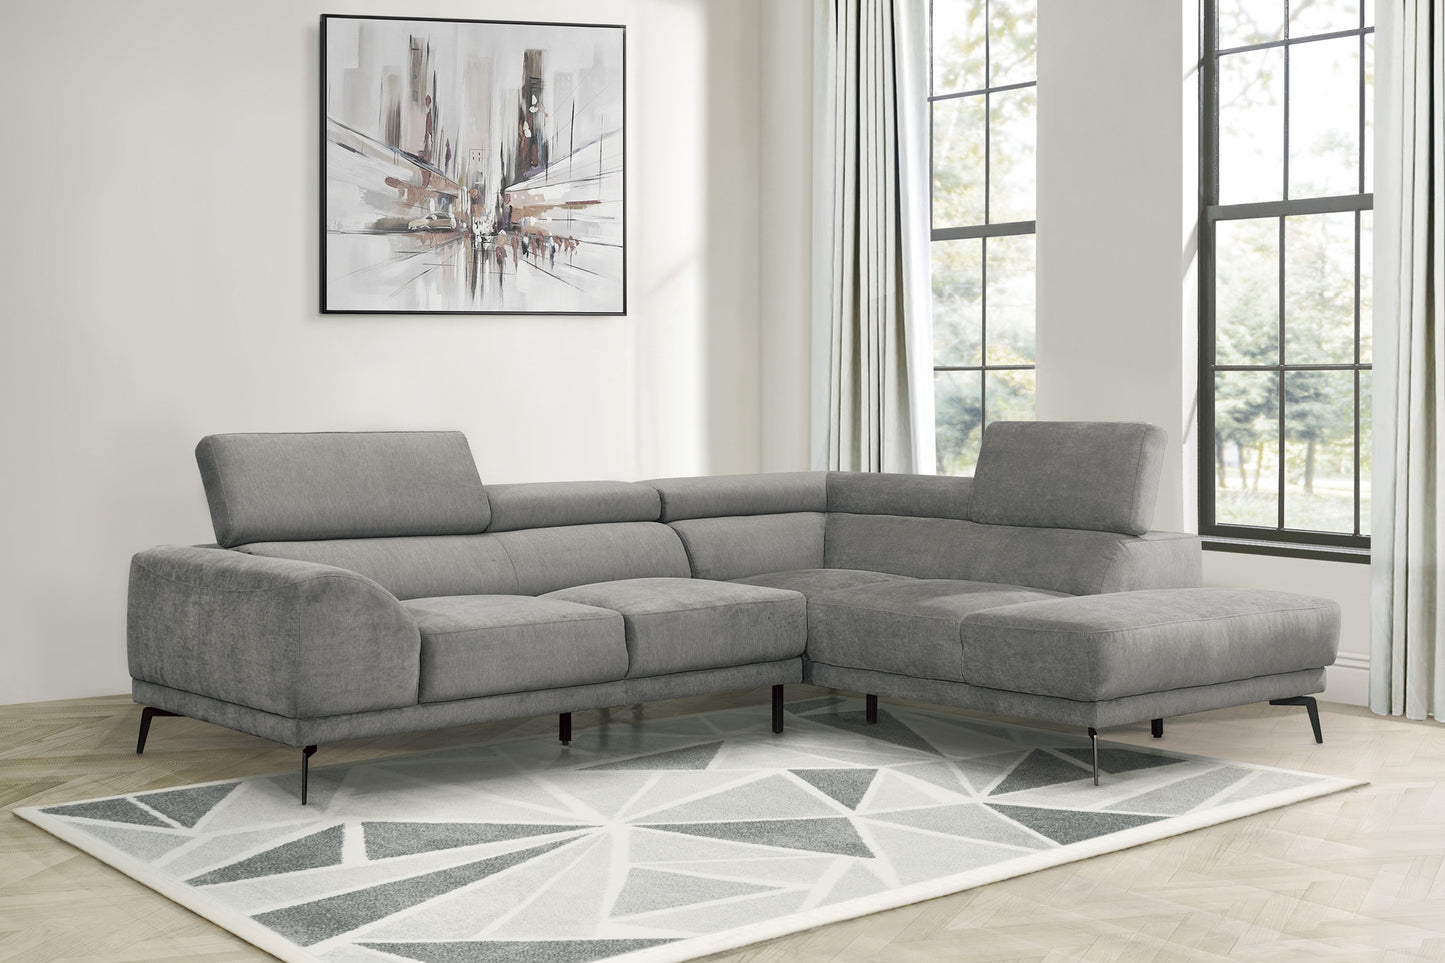 # Medora Sectional RAF only GREY CLEARANCE